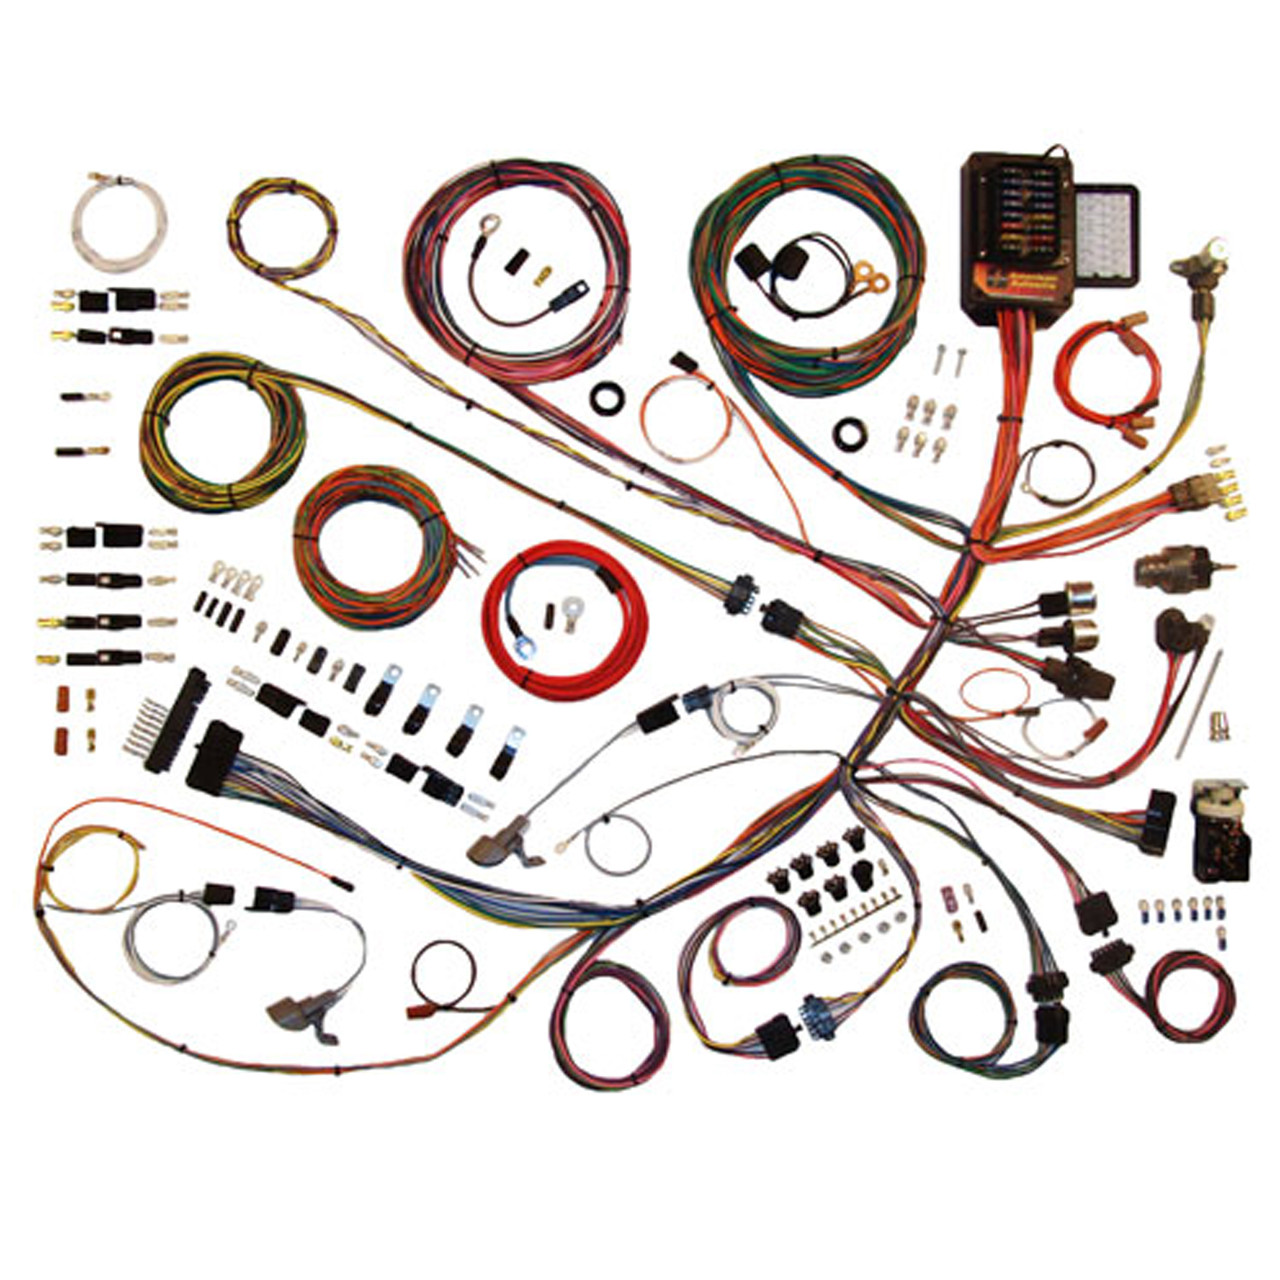 American Autowire 1961-1966 Ford Truck "Classic Update" Complete Wiring Kit (AME-510260)